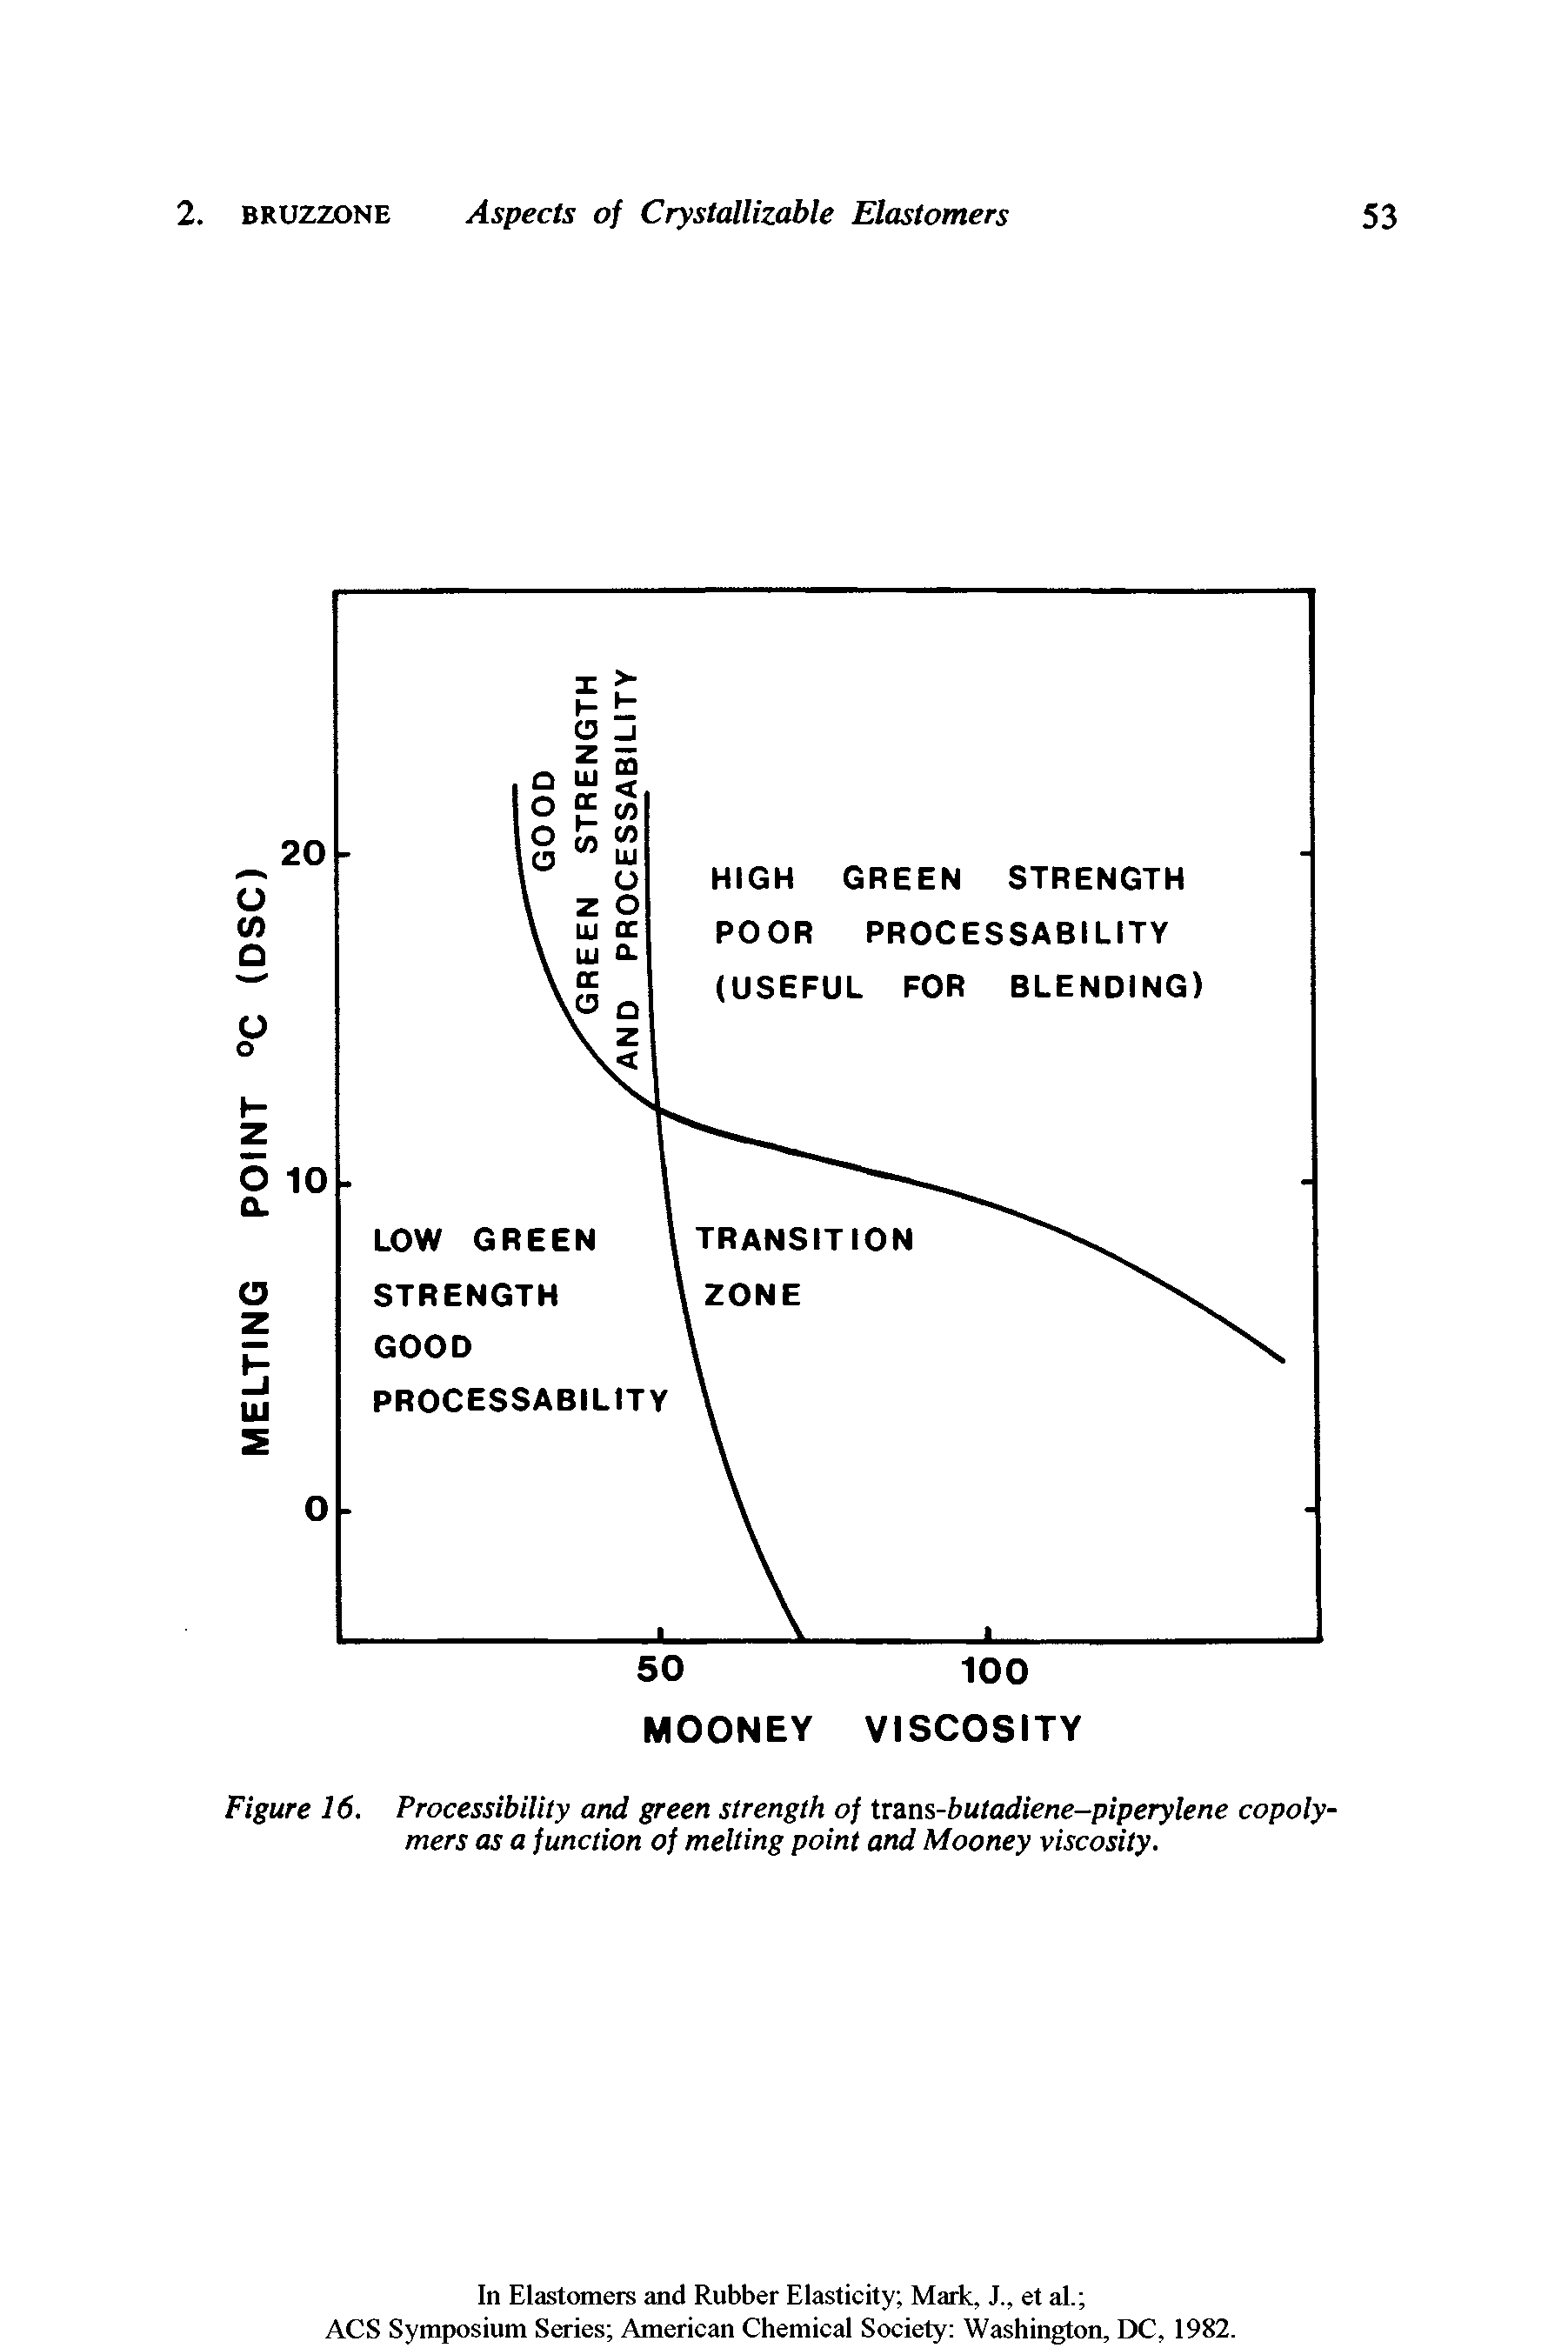 Figure 16. Processibility and green strength of trans-butadiene-piperylene copolymers as a function of melting point and Mooney viscosity.